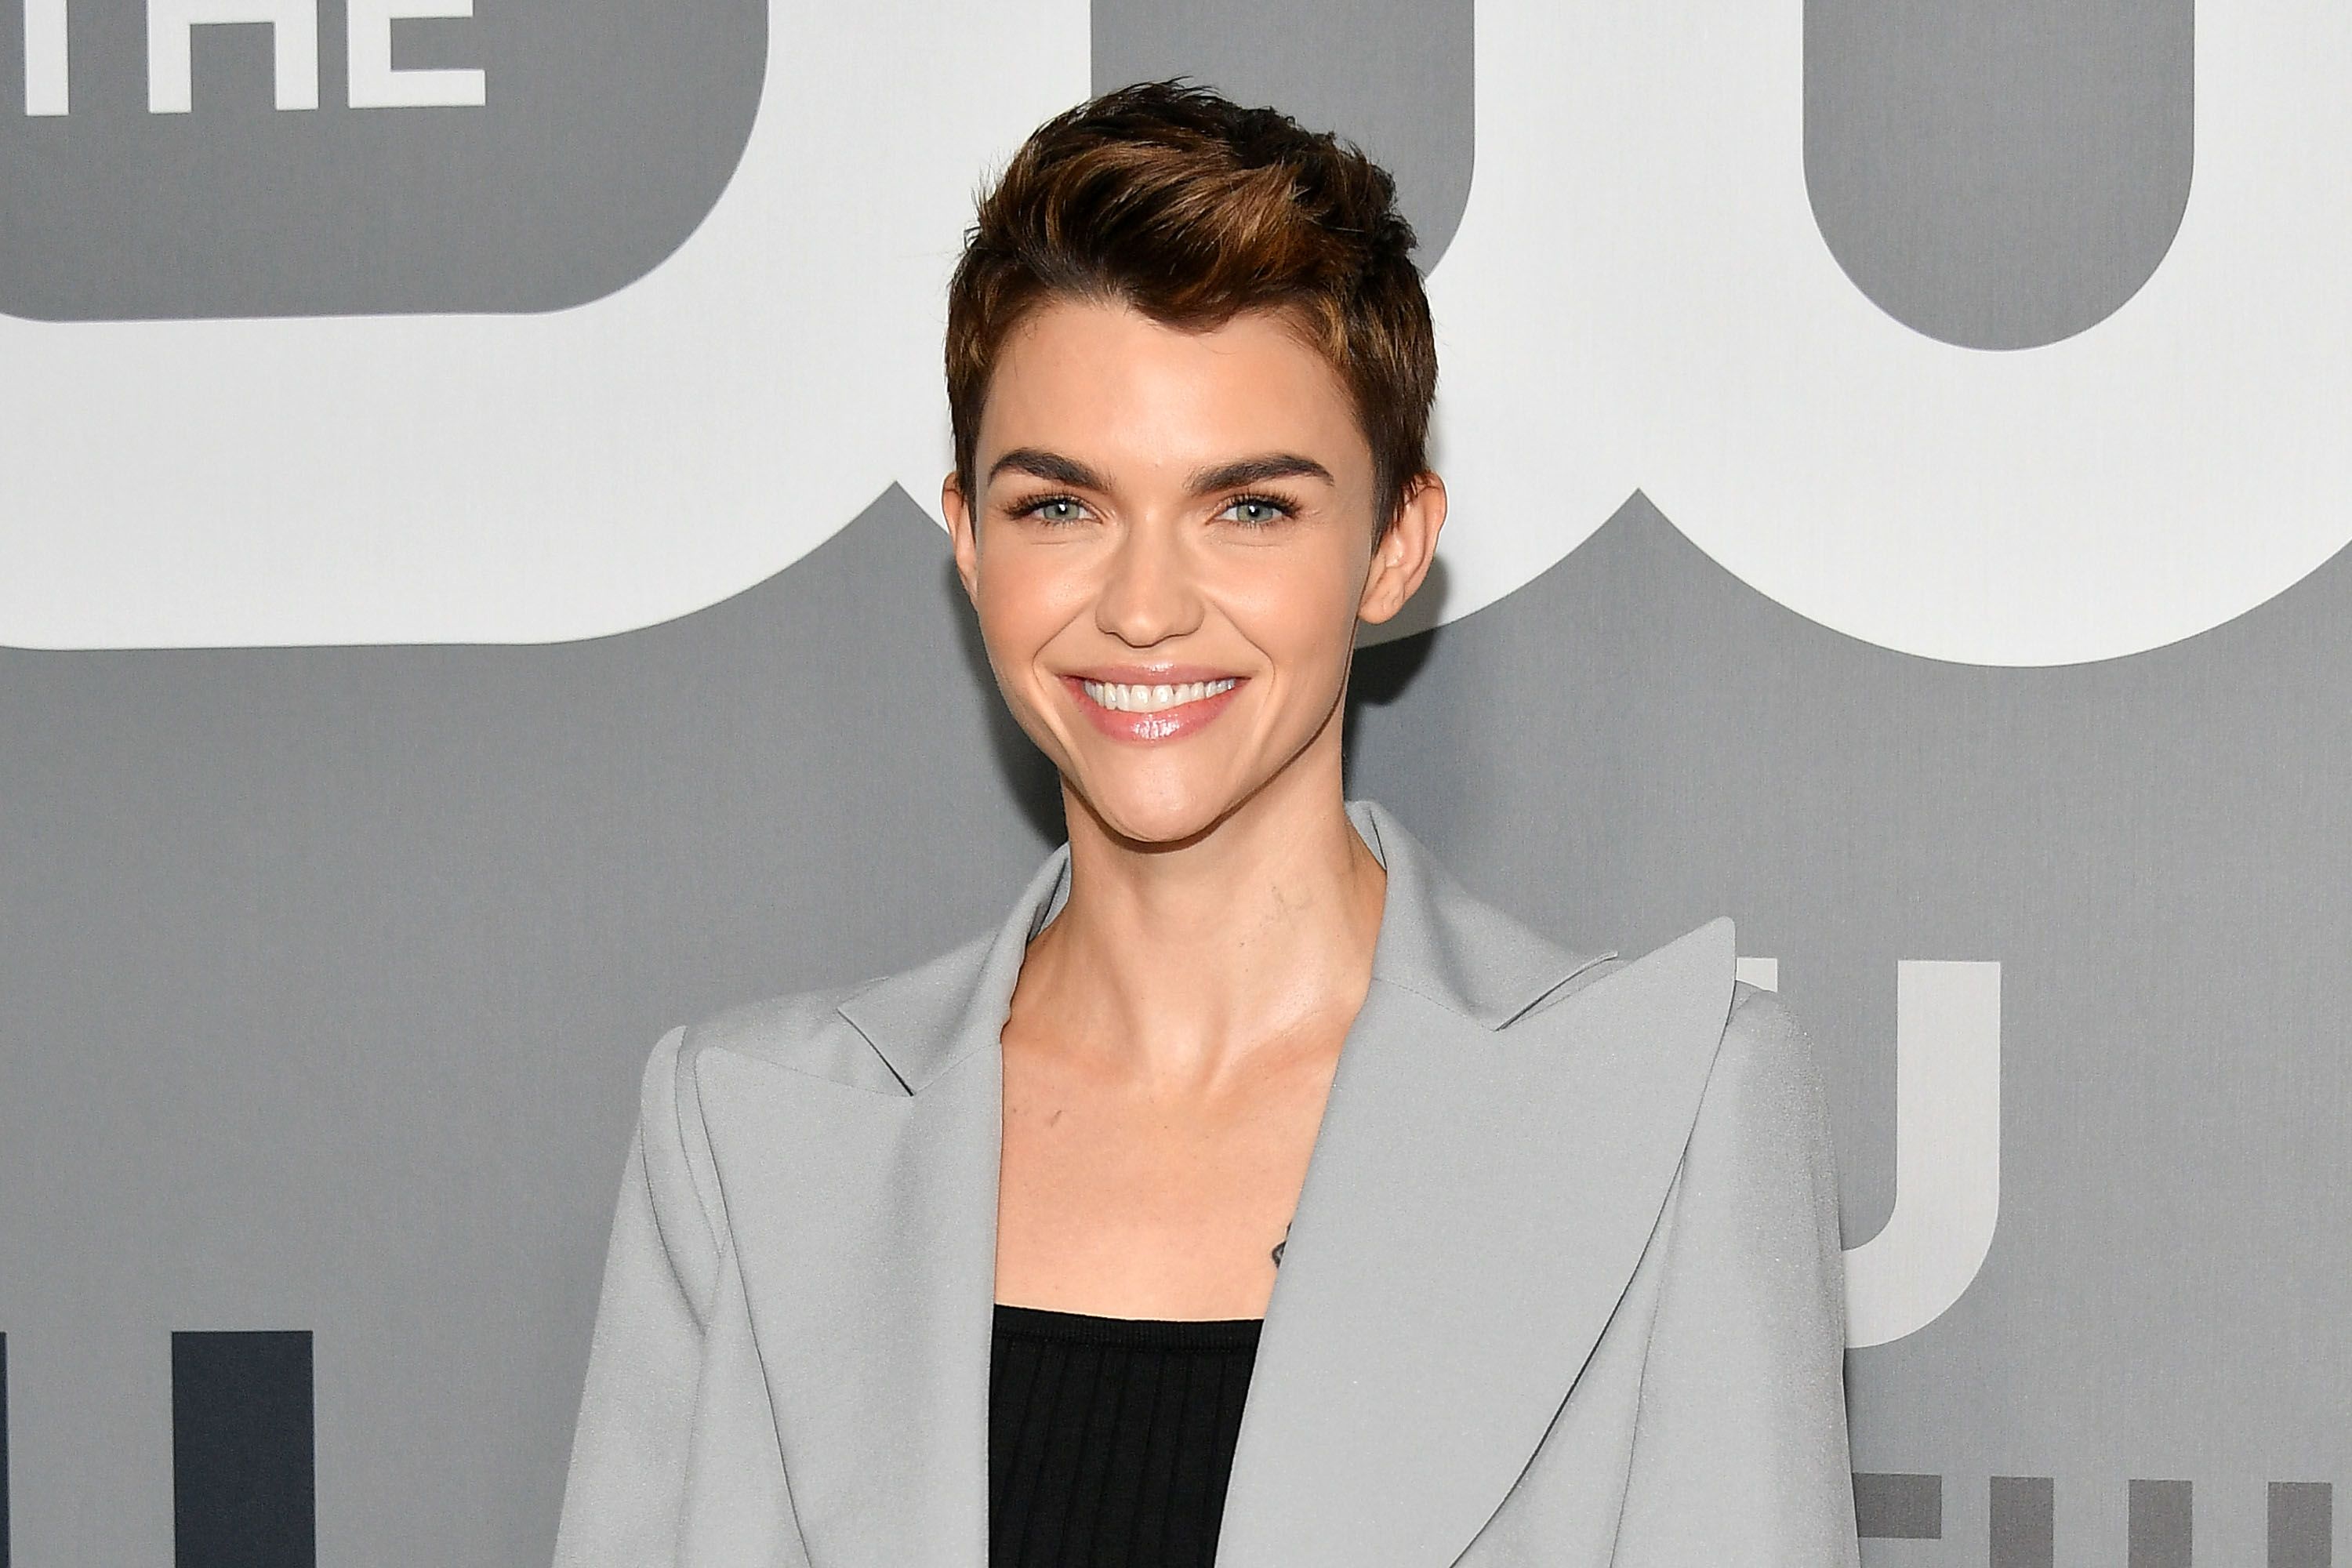 Sexy Sleeping Lesbian Porn - Ruby Rose wants her 'Batwoman' to be seen as more than just a lesbian  crime-fighter | CNN